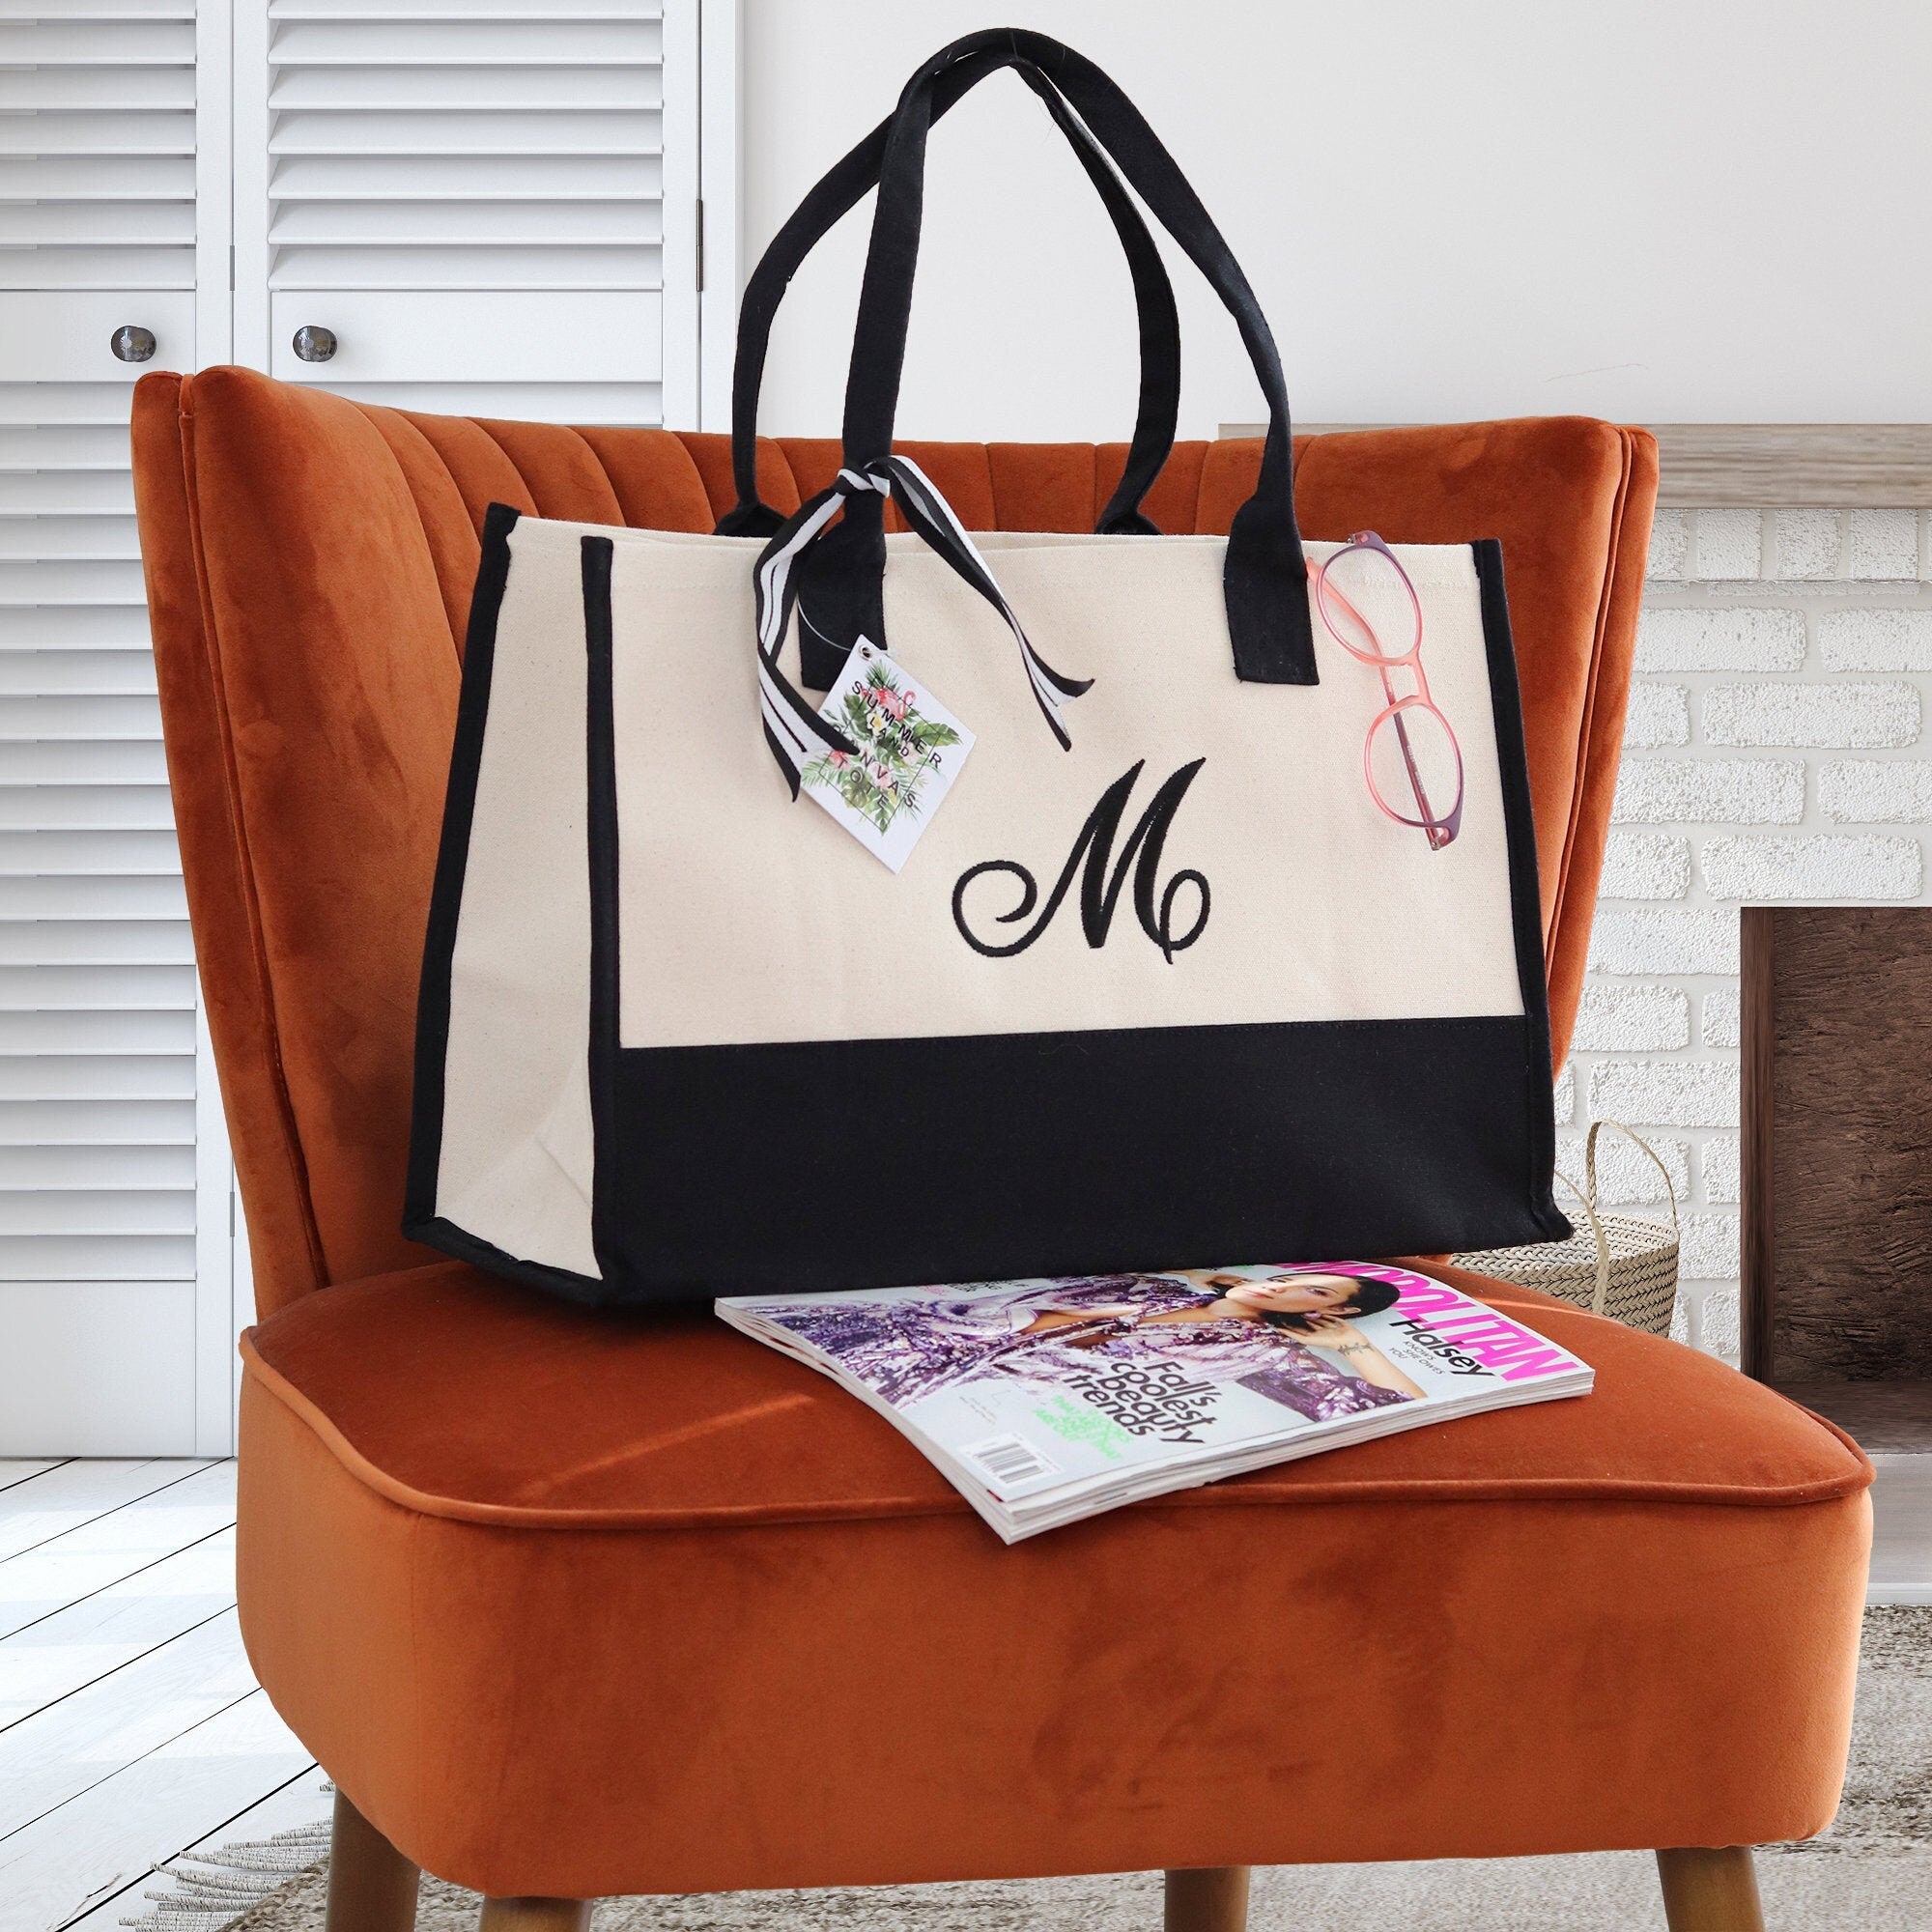 Cute tote bag Monogram Tote Bag with Initial 100% Cotton Canvas and a Chic Personalized Monogram, Beach Bag, Bridesmaid Bag Black